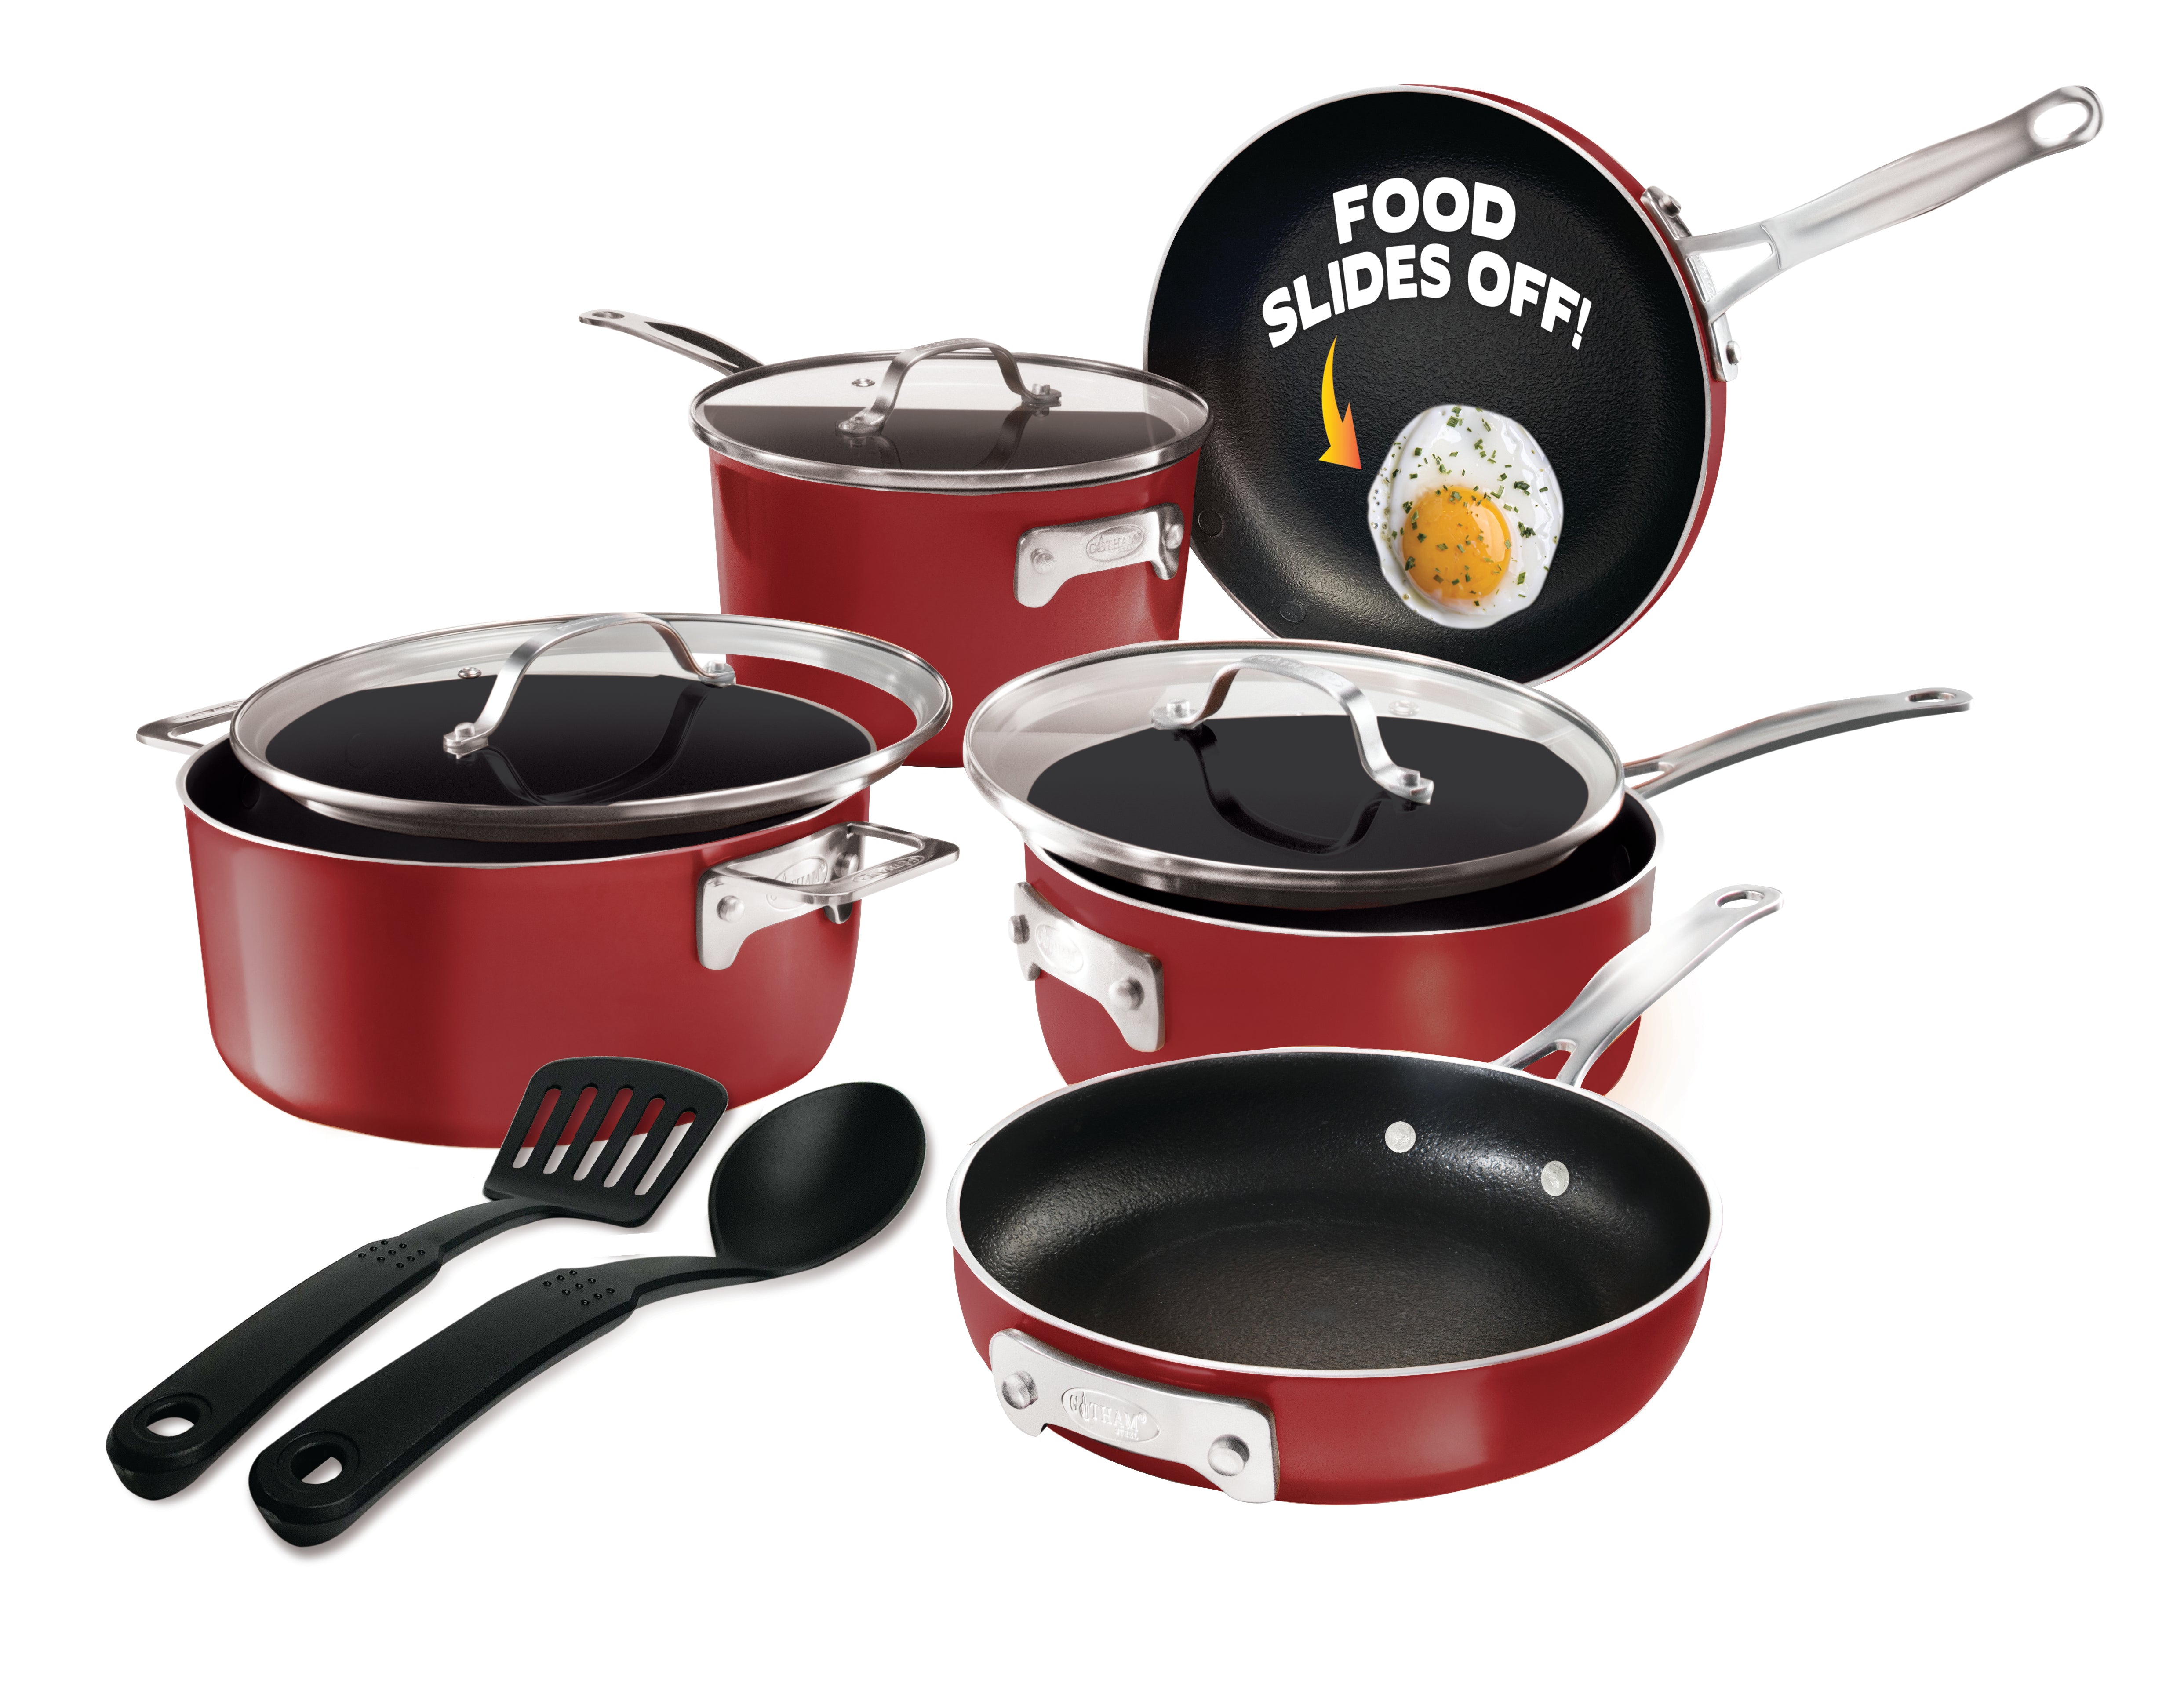 Gotham Steel 10-Pc. Stackable Pots And Pans Cookware Set With Utensils